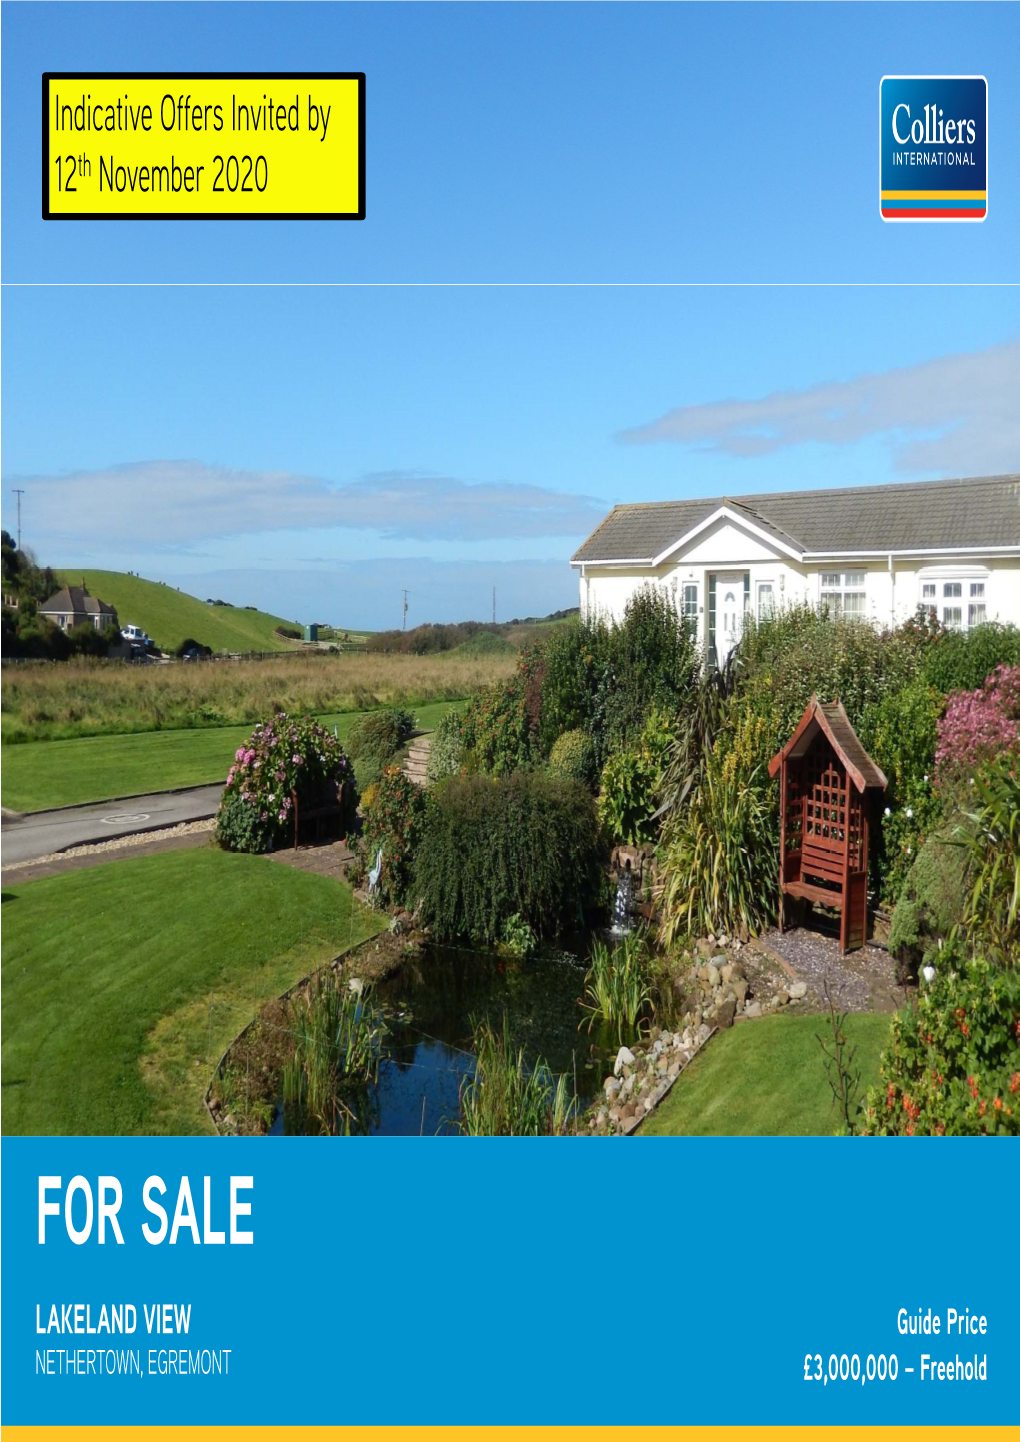 For Sale Lakeland View